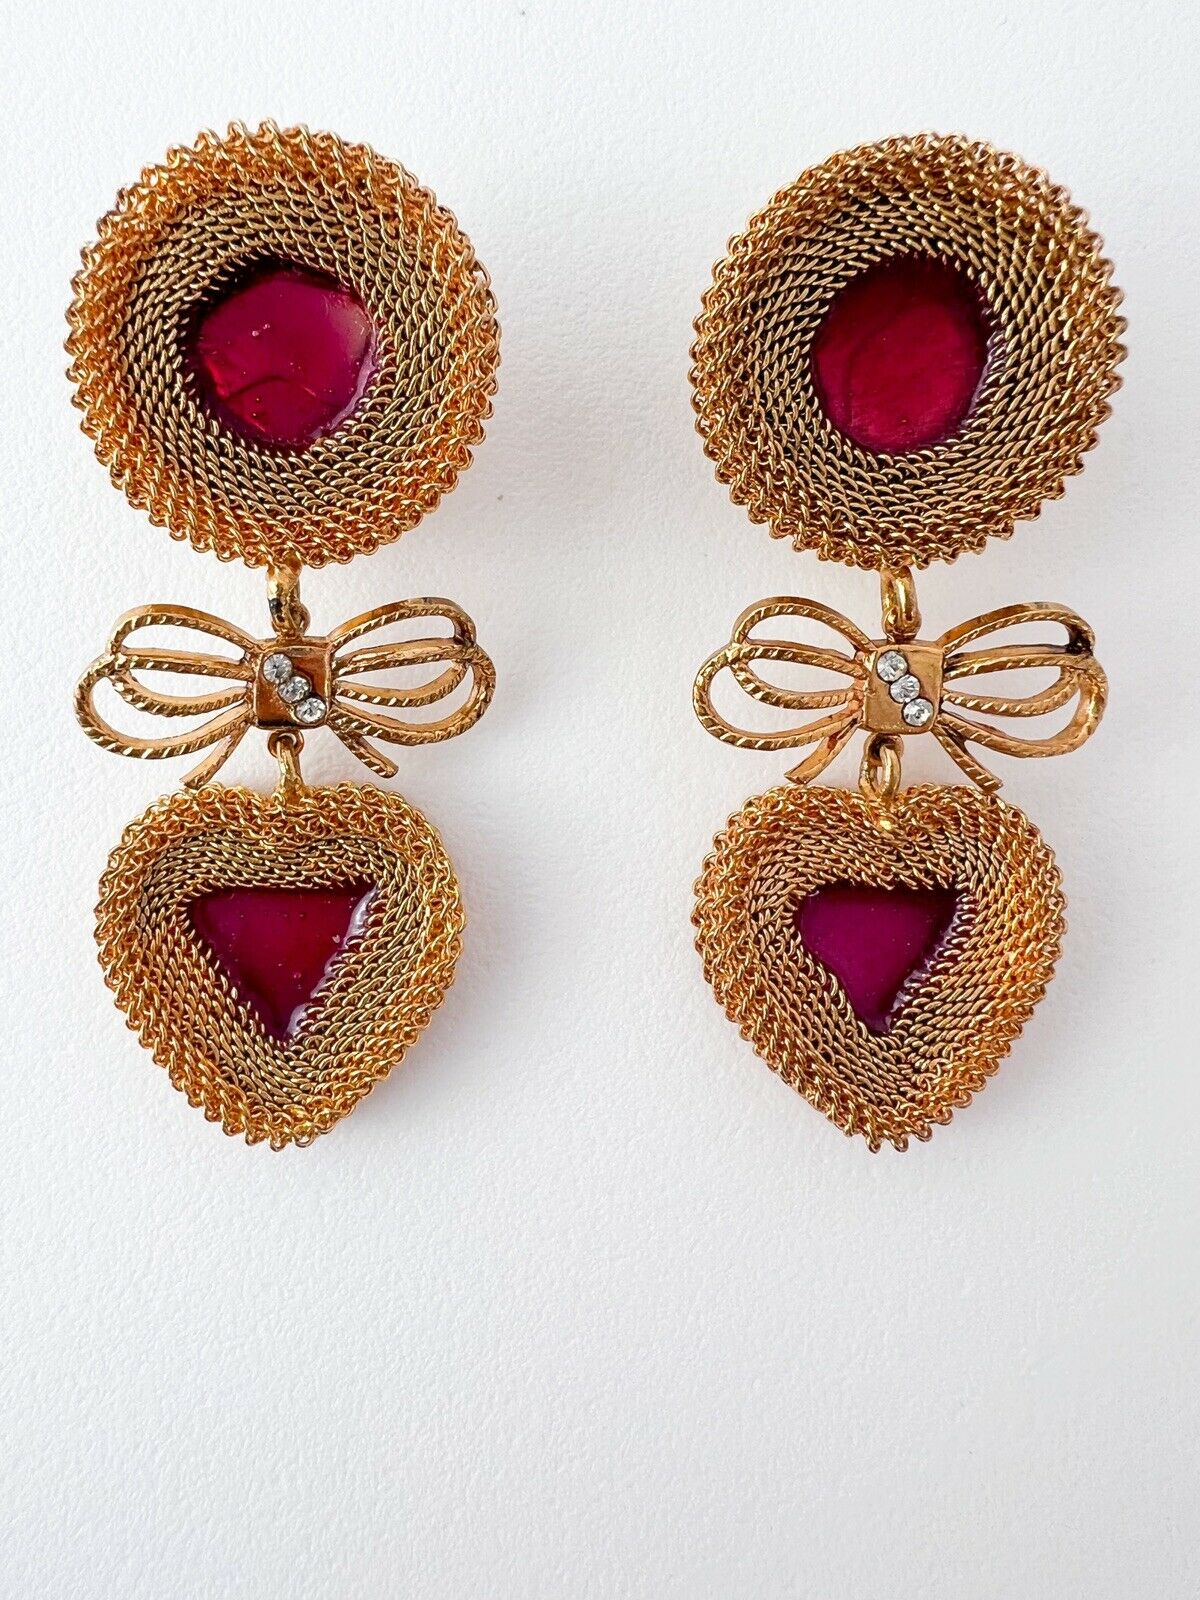 Dangling earrings poured glass red ribbon